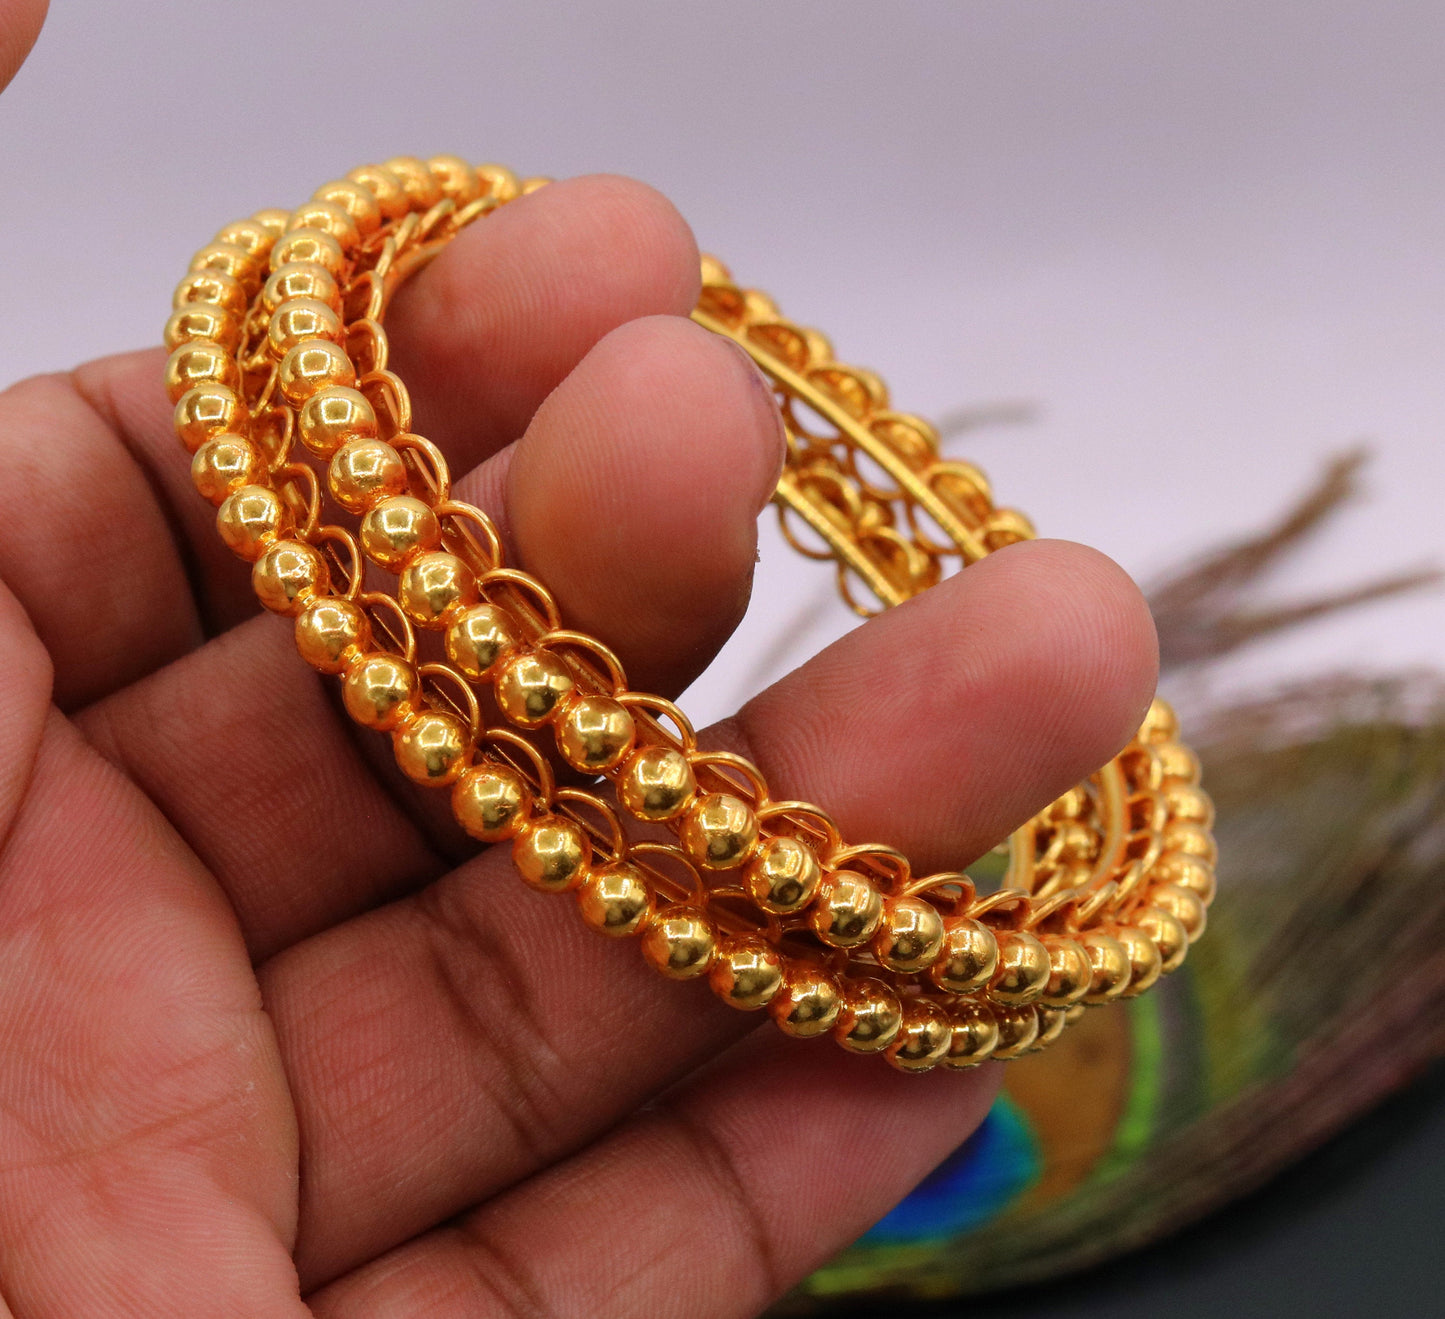 Vintage design handmade indian antique style solid gold bangle bracelet fabulous women's tribal jewelry from india ba43 - TRIBAL ORNAMENTS